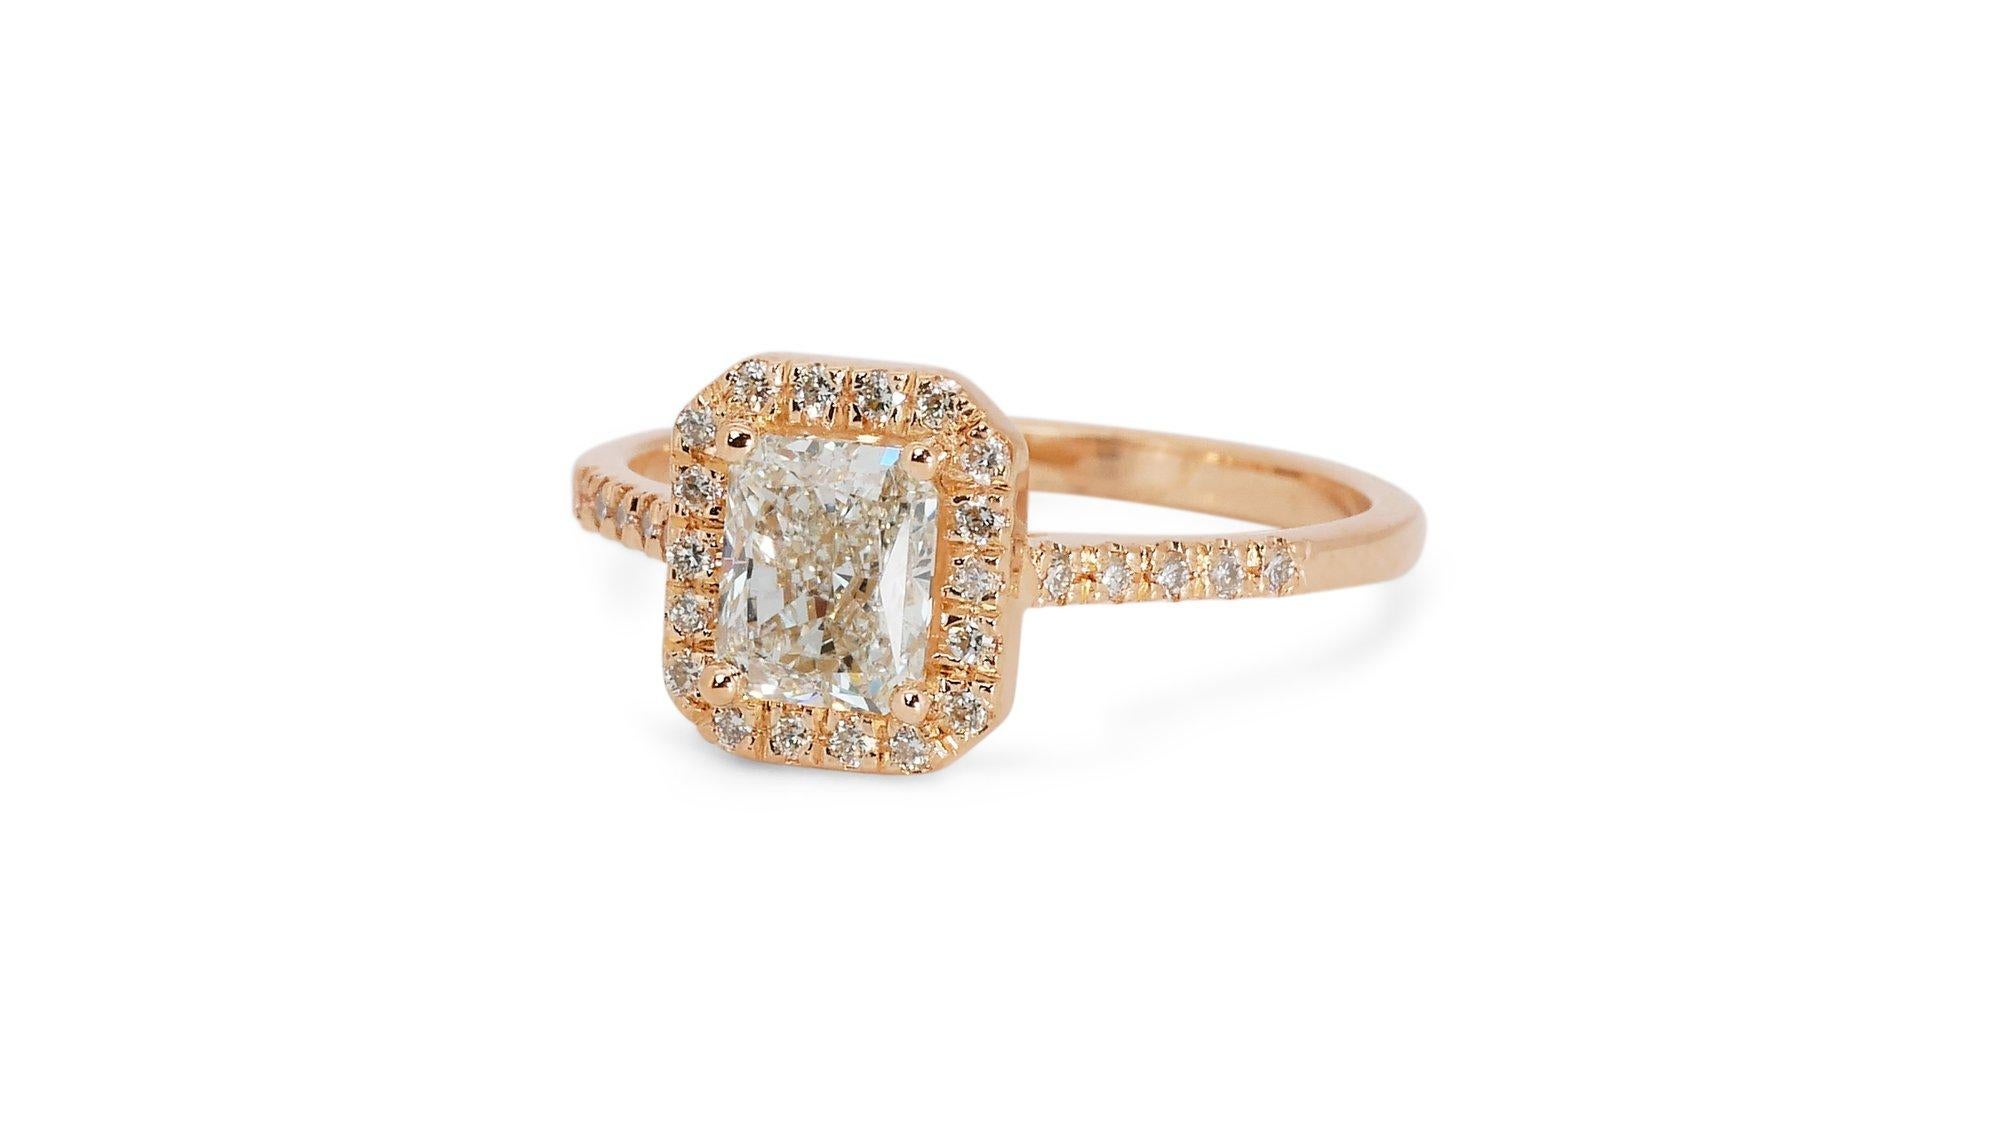 Glamorous 18k Yellow Gold Natural Diamond Halo Ring w/1.72 ct - GIA Certified

This captivating diamond halo ring showcases a unique and modern design, featuring a stunning cut-cornered rectangular center diamond with 1.50 carat and 28 sparkling